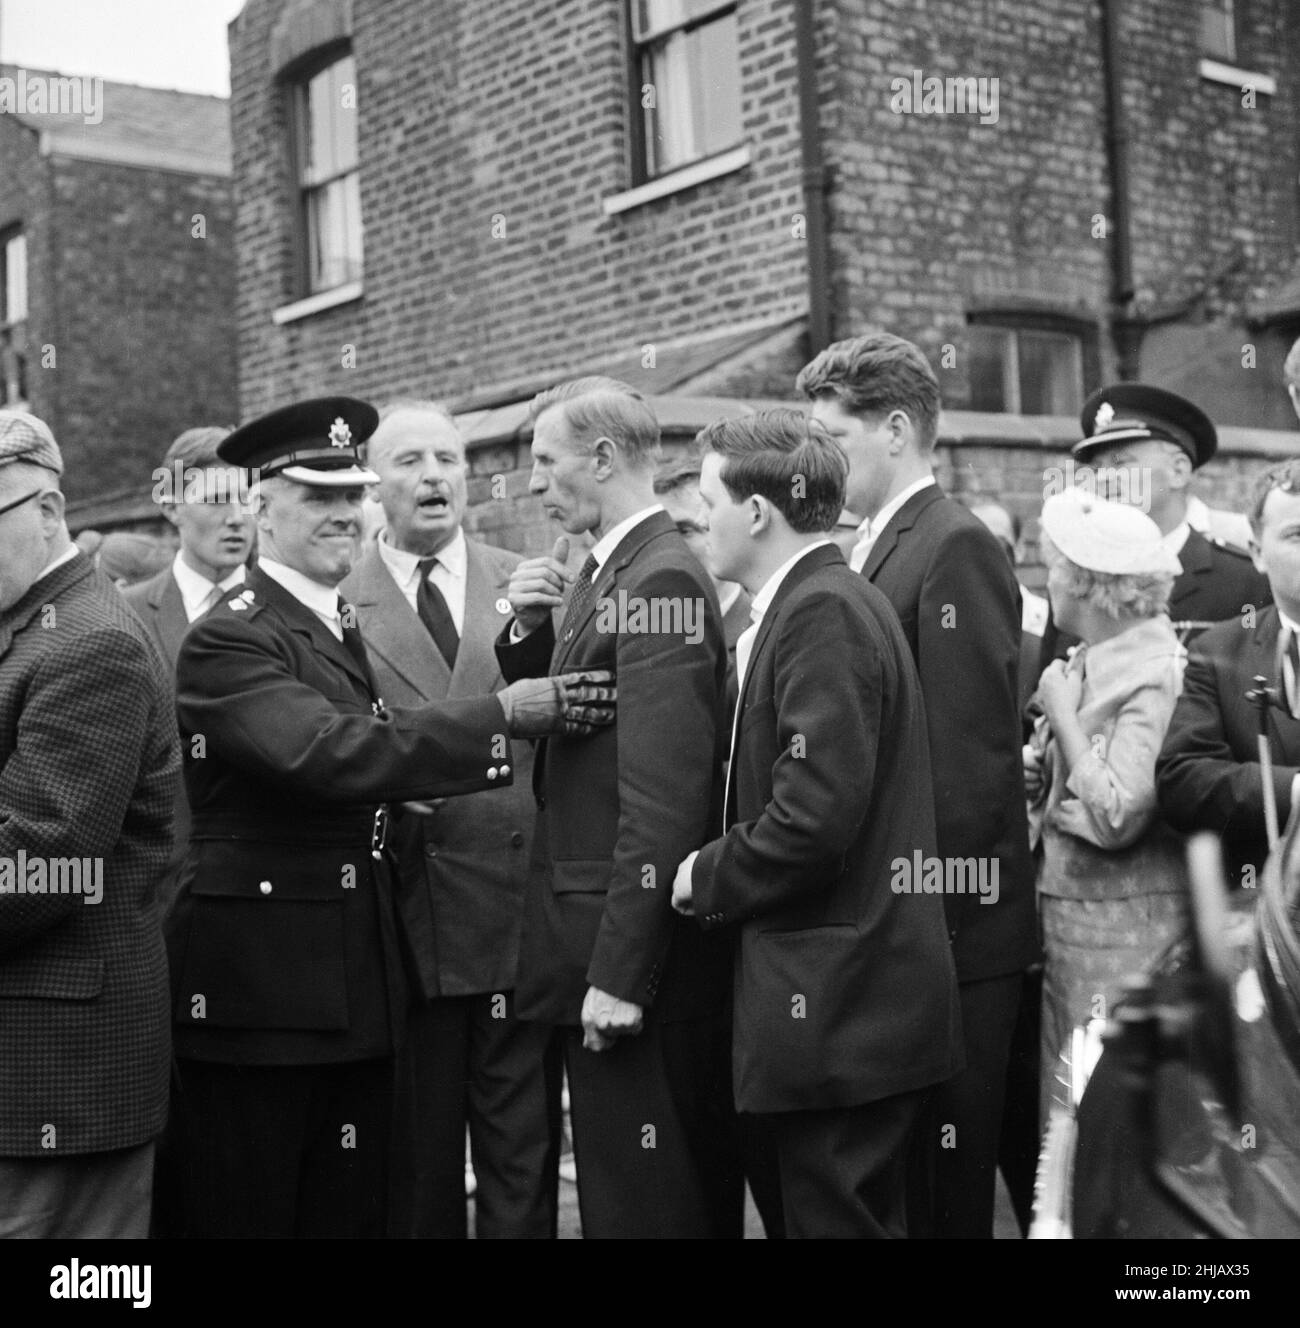 Sir Oswald Mosley visits Manchester to take part in a march organised by his British Union of Fascists supporters, Sunday 29th July 1962. When the eighty marchers gathered, an angry crowd rushed them and Mosley disappeared into a flurry of flying fists and boots and his groups banners were torn to tatters.  Police broke up the fighting mob and rescued 65-year-old Mosley but the march soon turned into a riot causing a mile of terror with fights breaking out every few yards. Many marchers fell out with bleeding faces and torn clothes. The rest were pelted with stones, coins, cabbages, tomatoes a Stock Photo